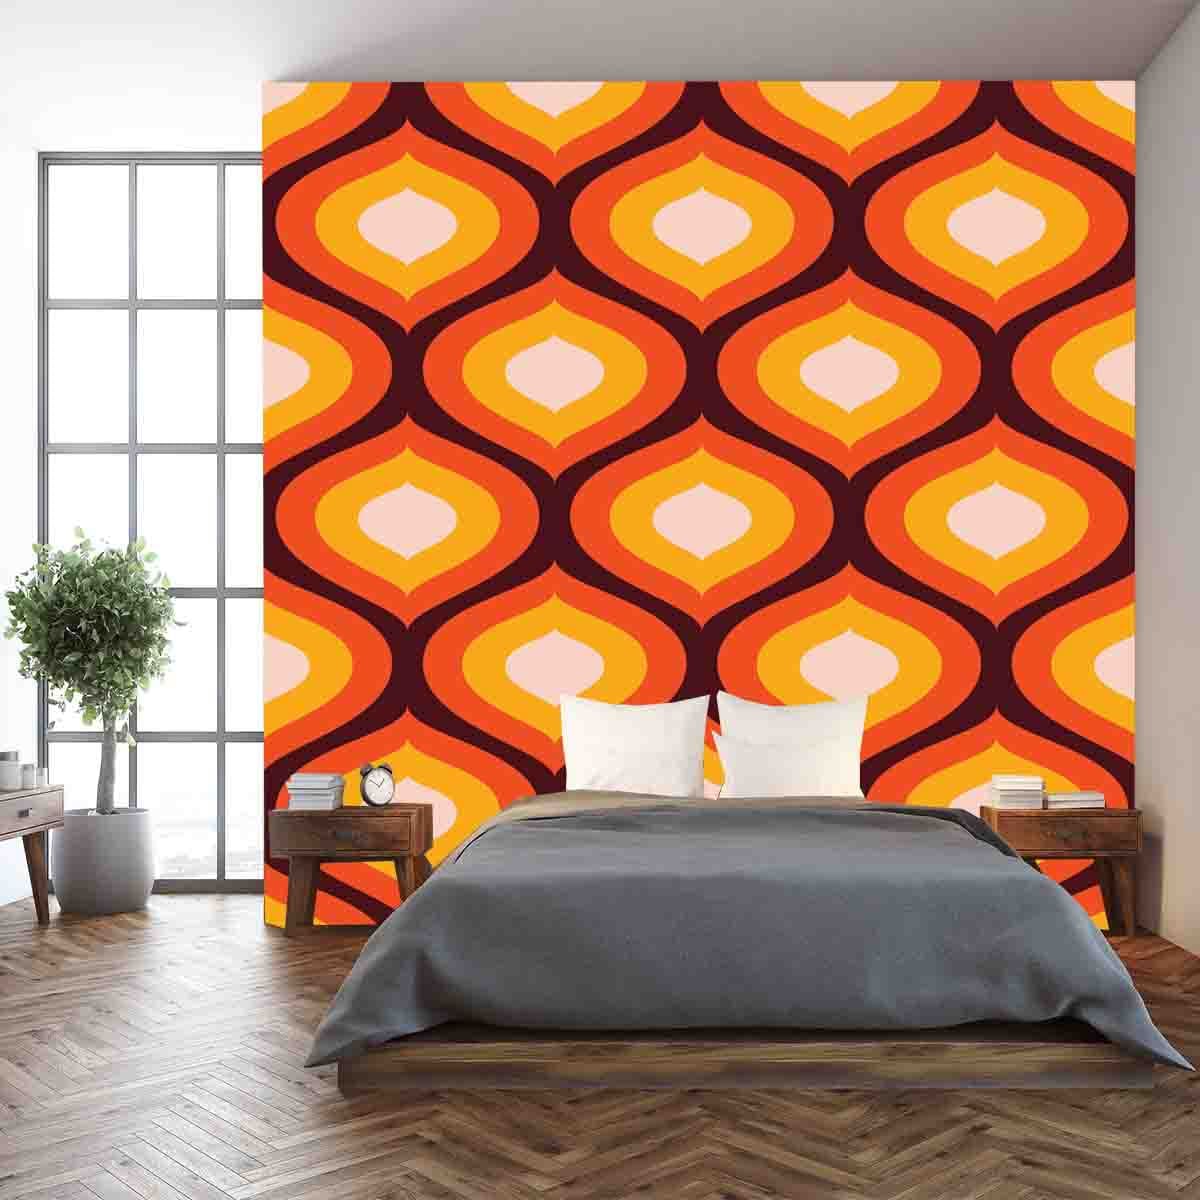 Funky Mod Century Modern Geometric Patten With Ogee Motifs. Groovy Sixties And Seventies Wallpaper Bedroom Mural